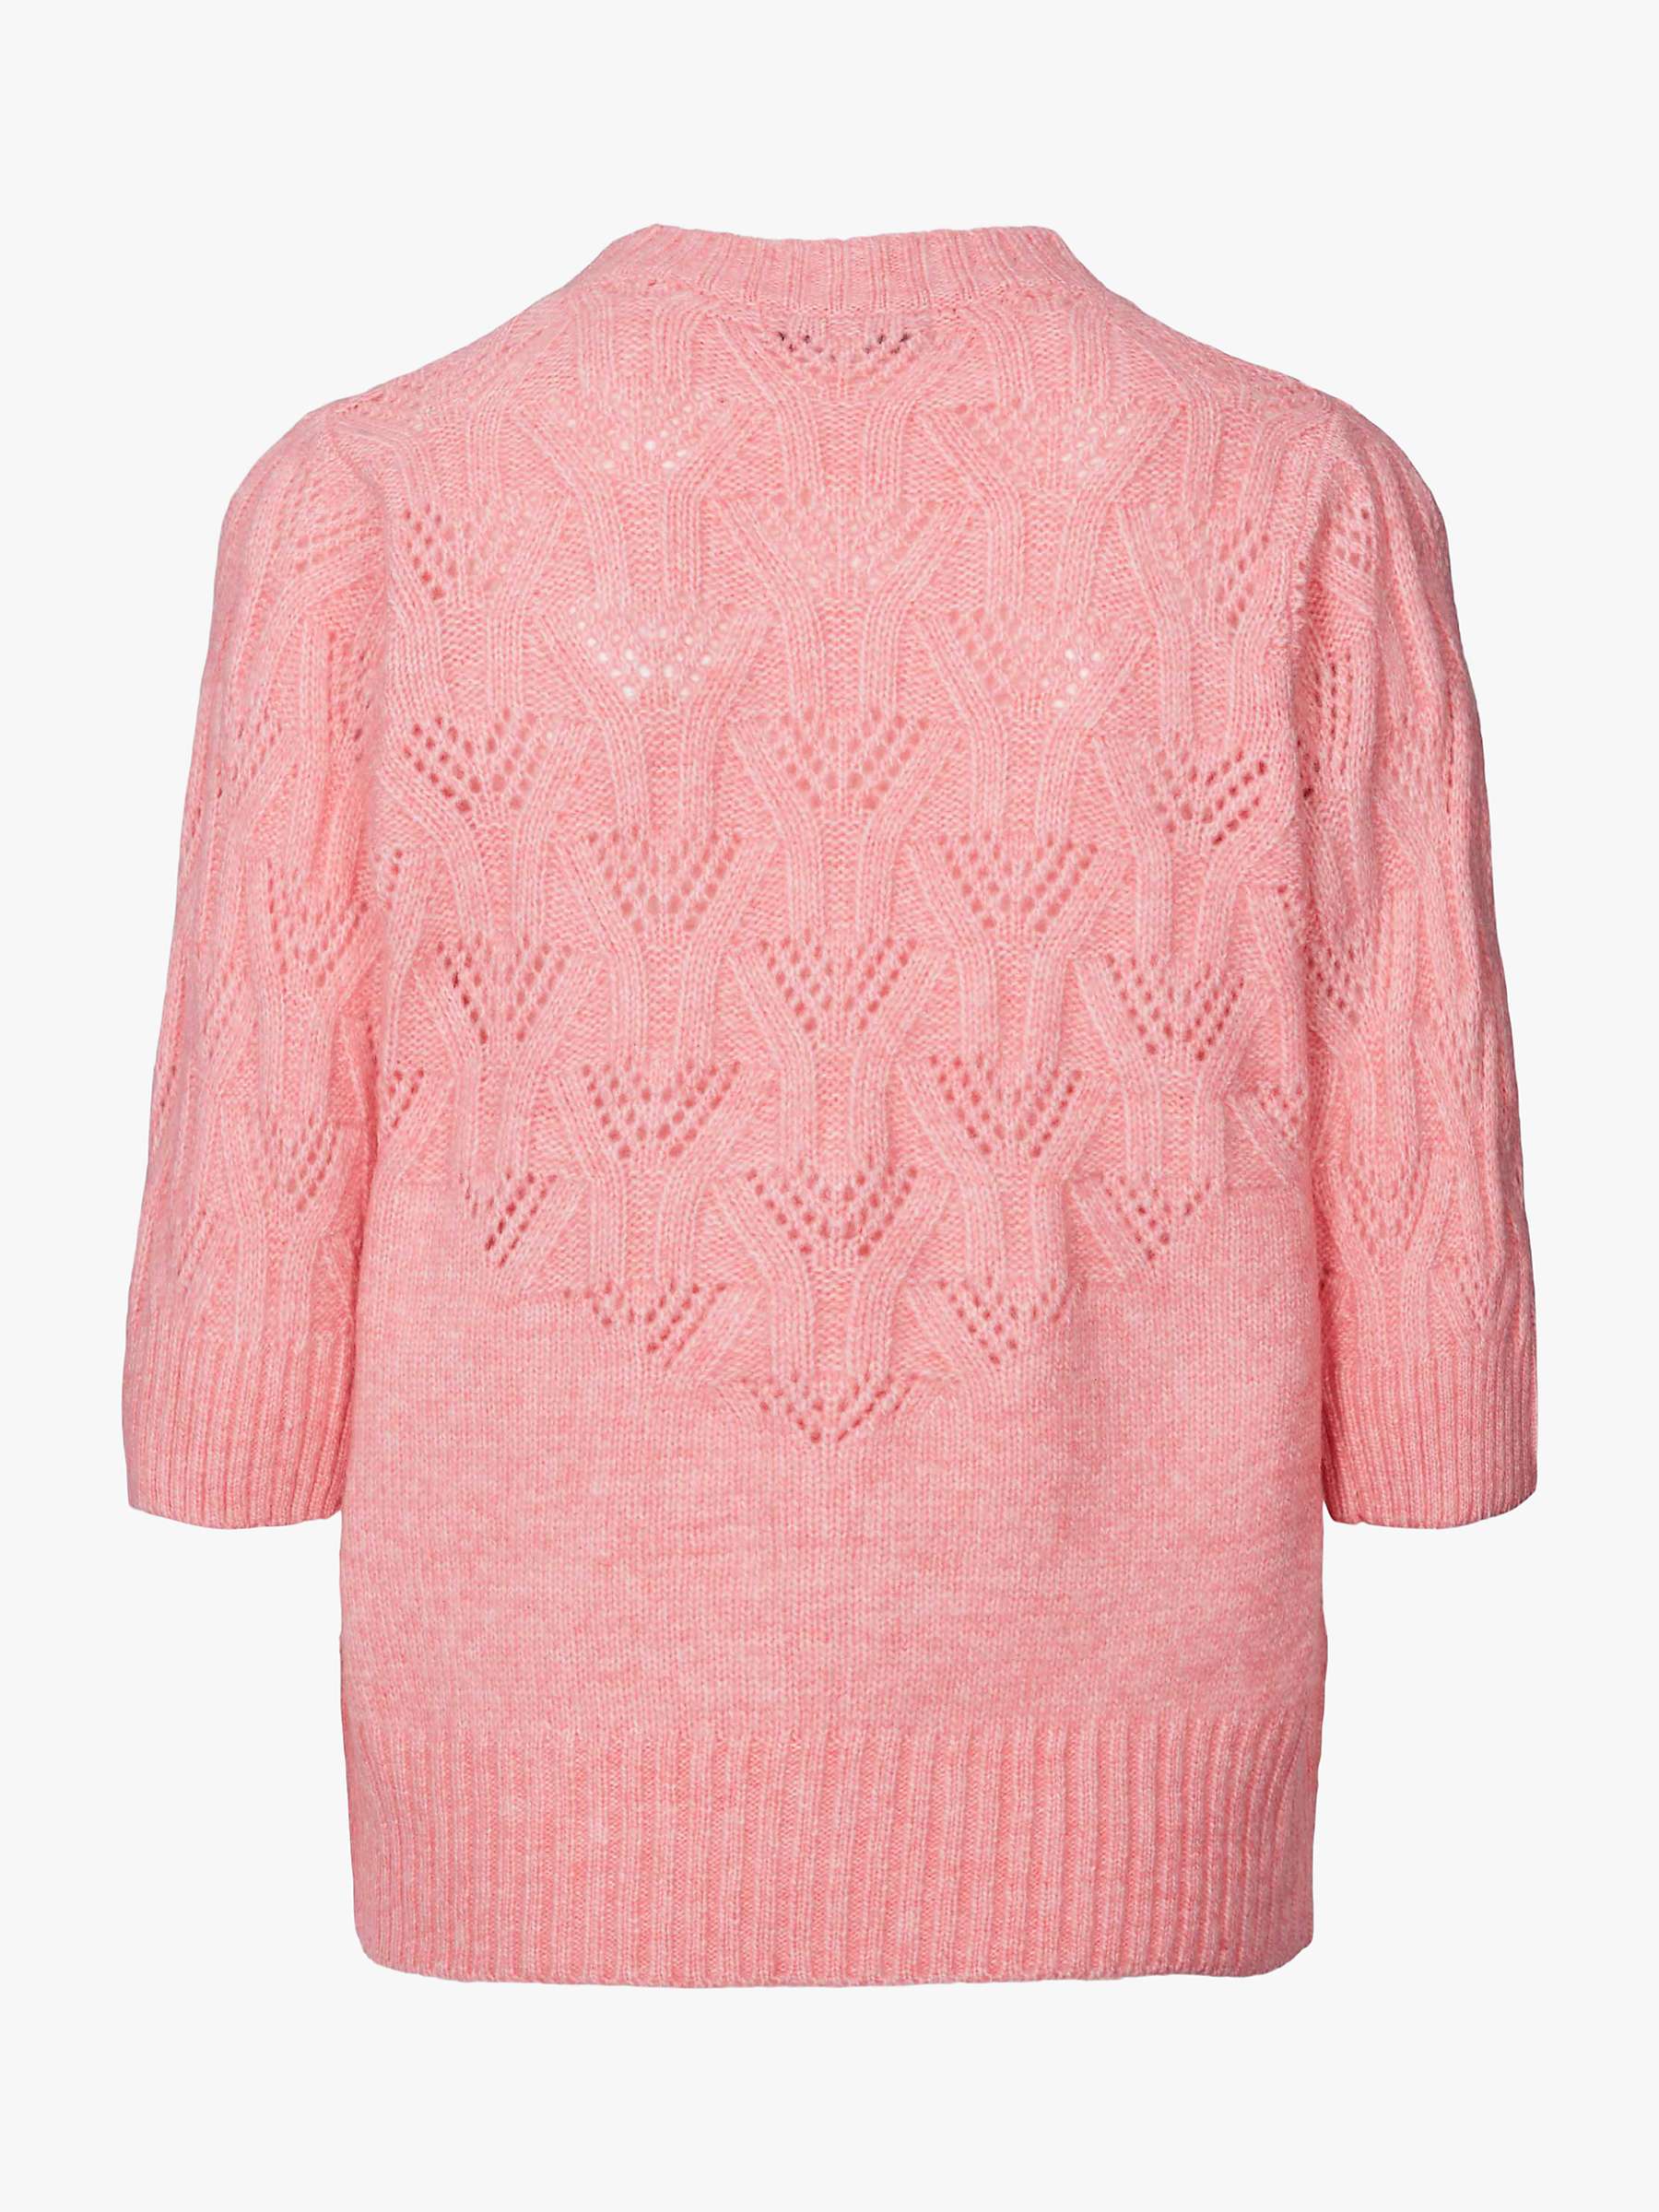 Buy Lollys Laundry Mala Knitted Blouse Online at johnlewis.com